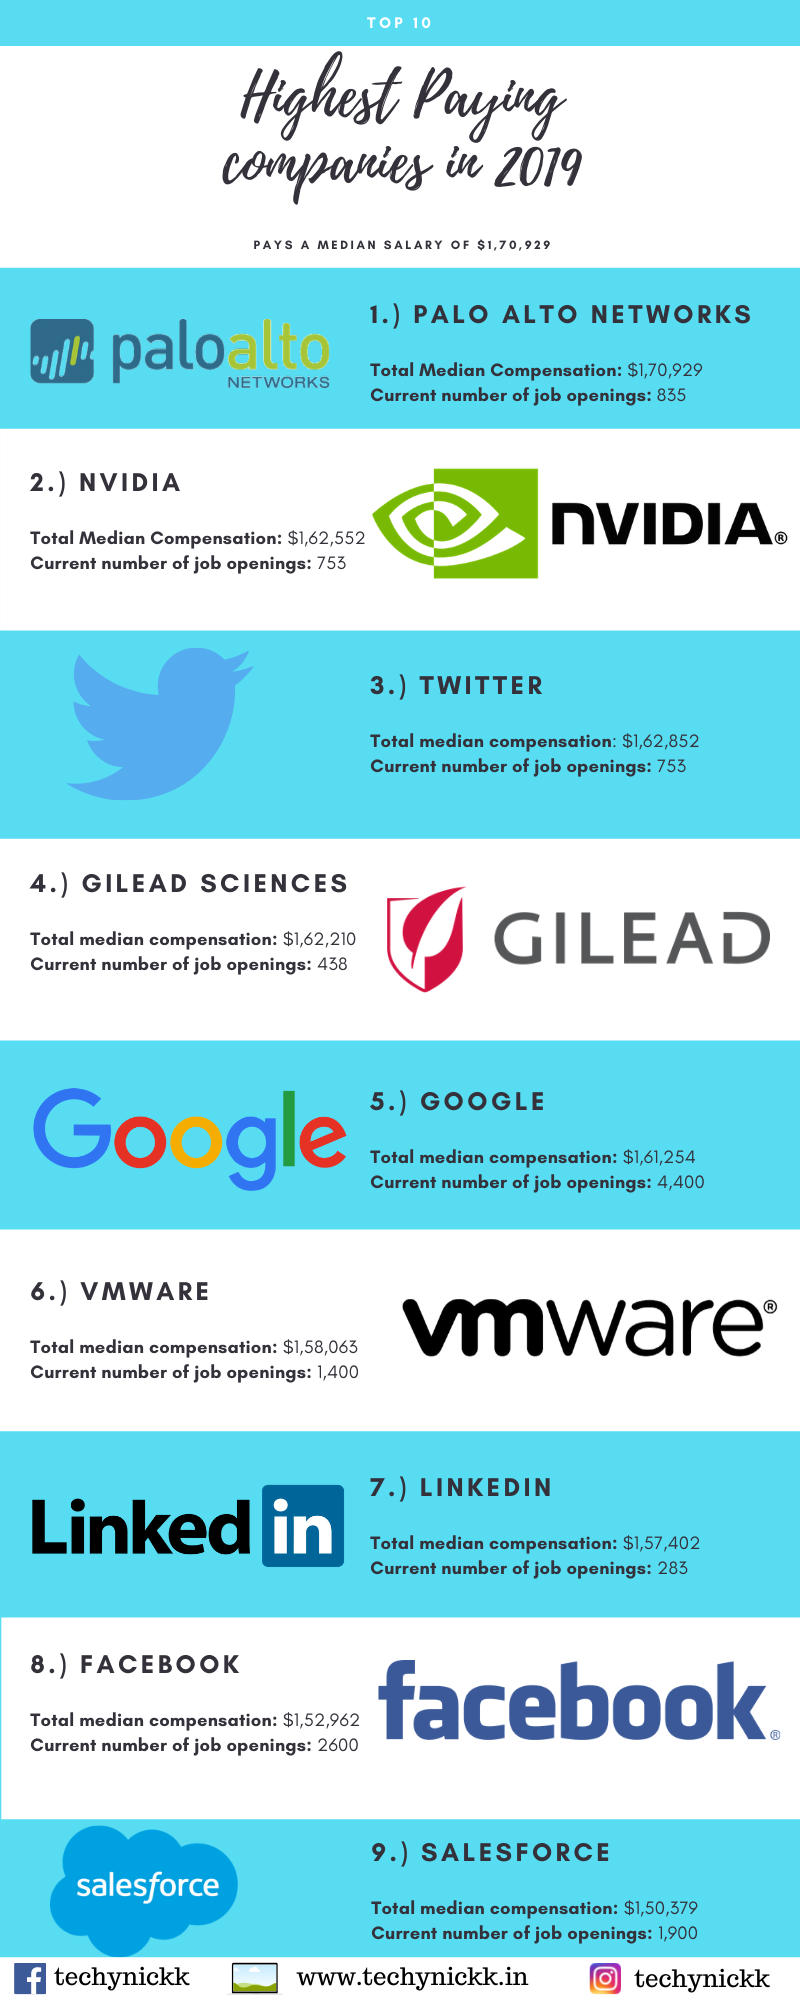 Infographic : highest paying companies in the world in 2019 and 2020